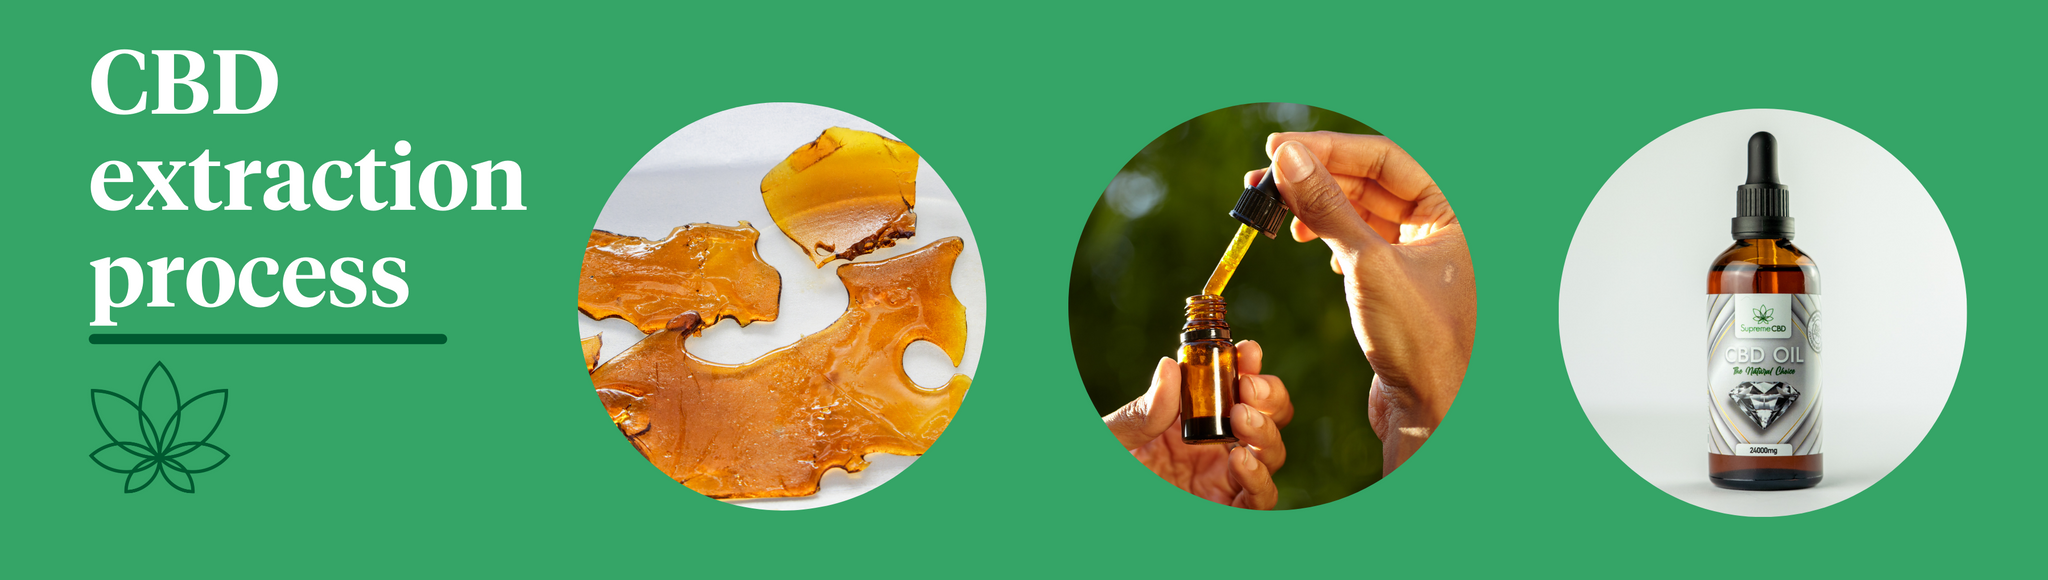 A green background with the Supreme CBD logo to the right with white text saying "CBD extraction process" with three circular images showcasing the process of extracting CBD.